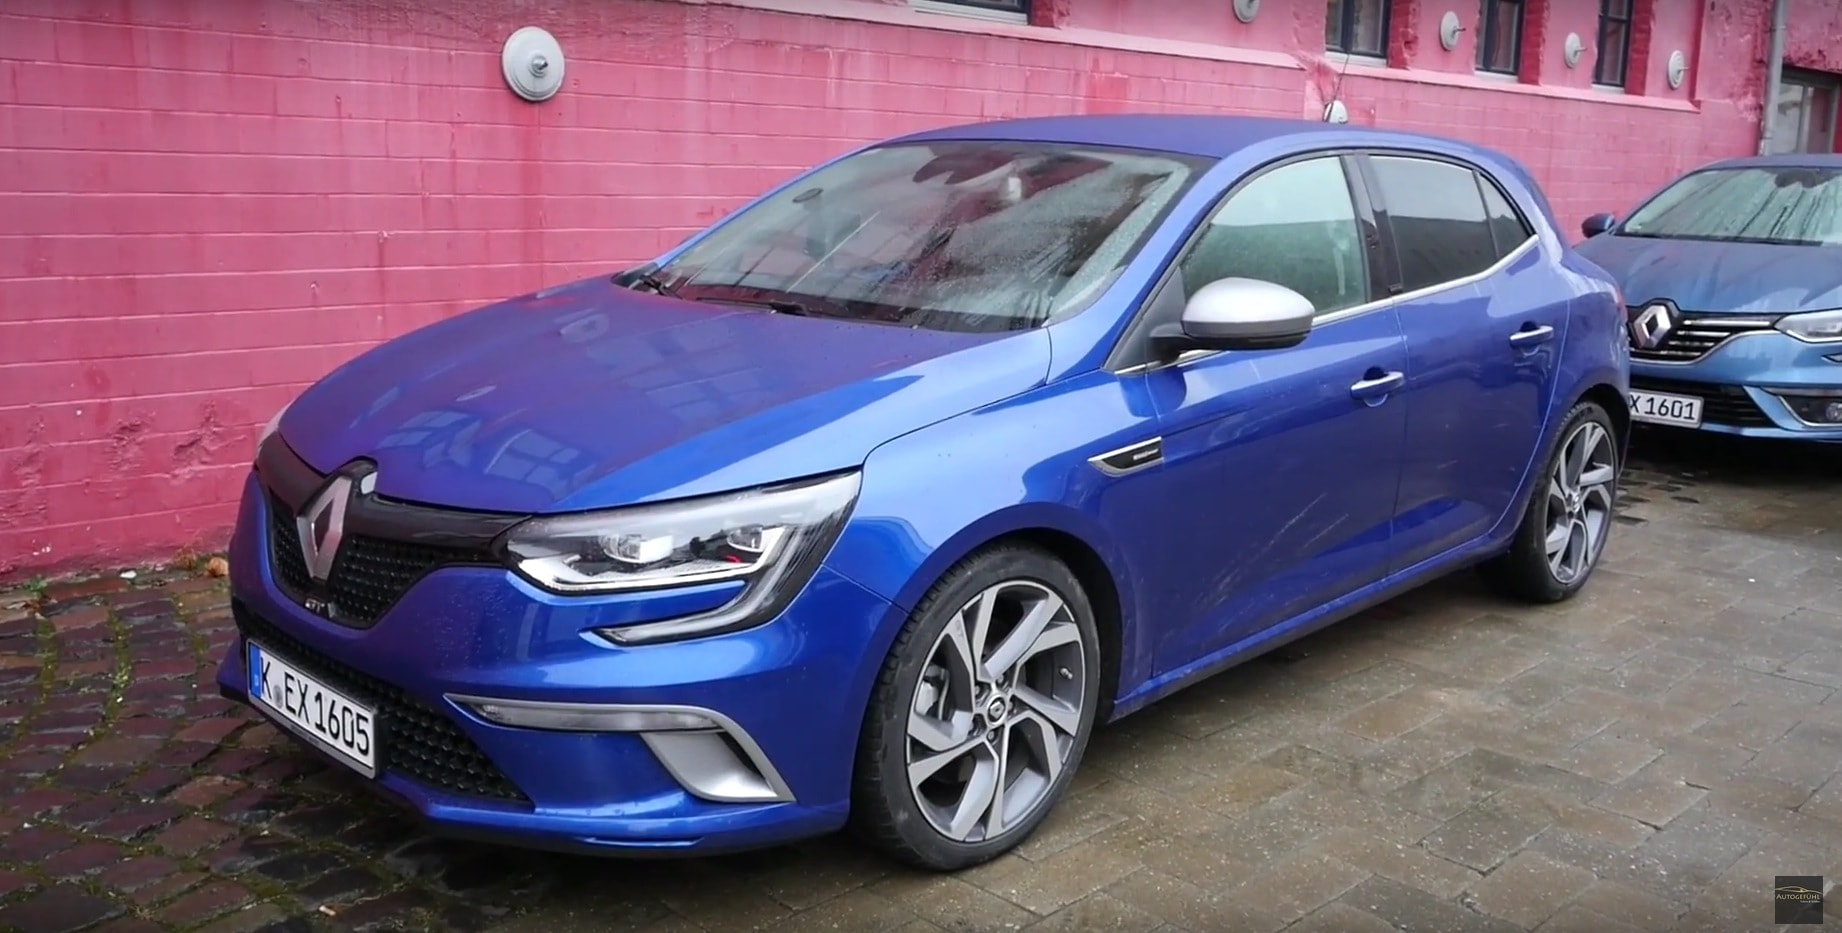 Dicteren Wees Imperial 2016 Renault Megane Reviews: The Really Long and Short Versions -  autoevolution